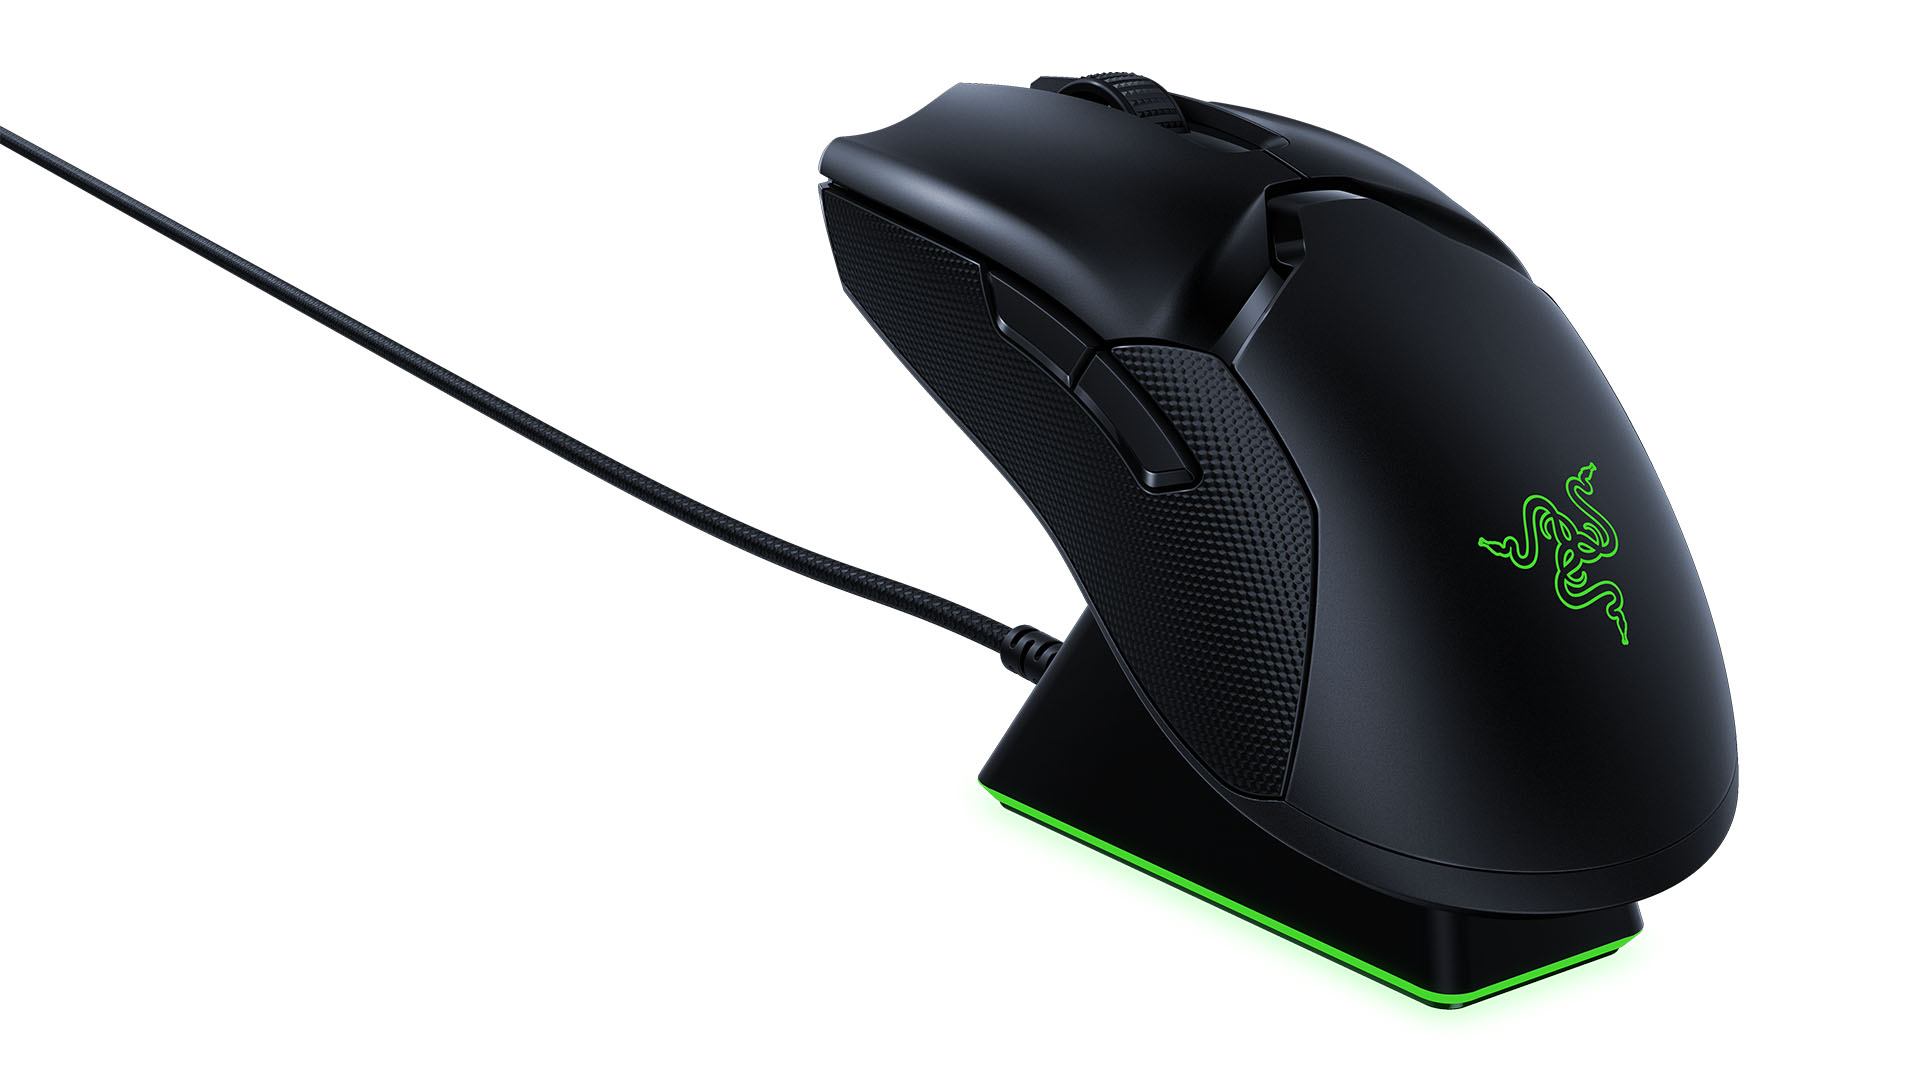 Razer Viper V2 Pro Review: Featherweight Performance in a